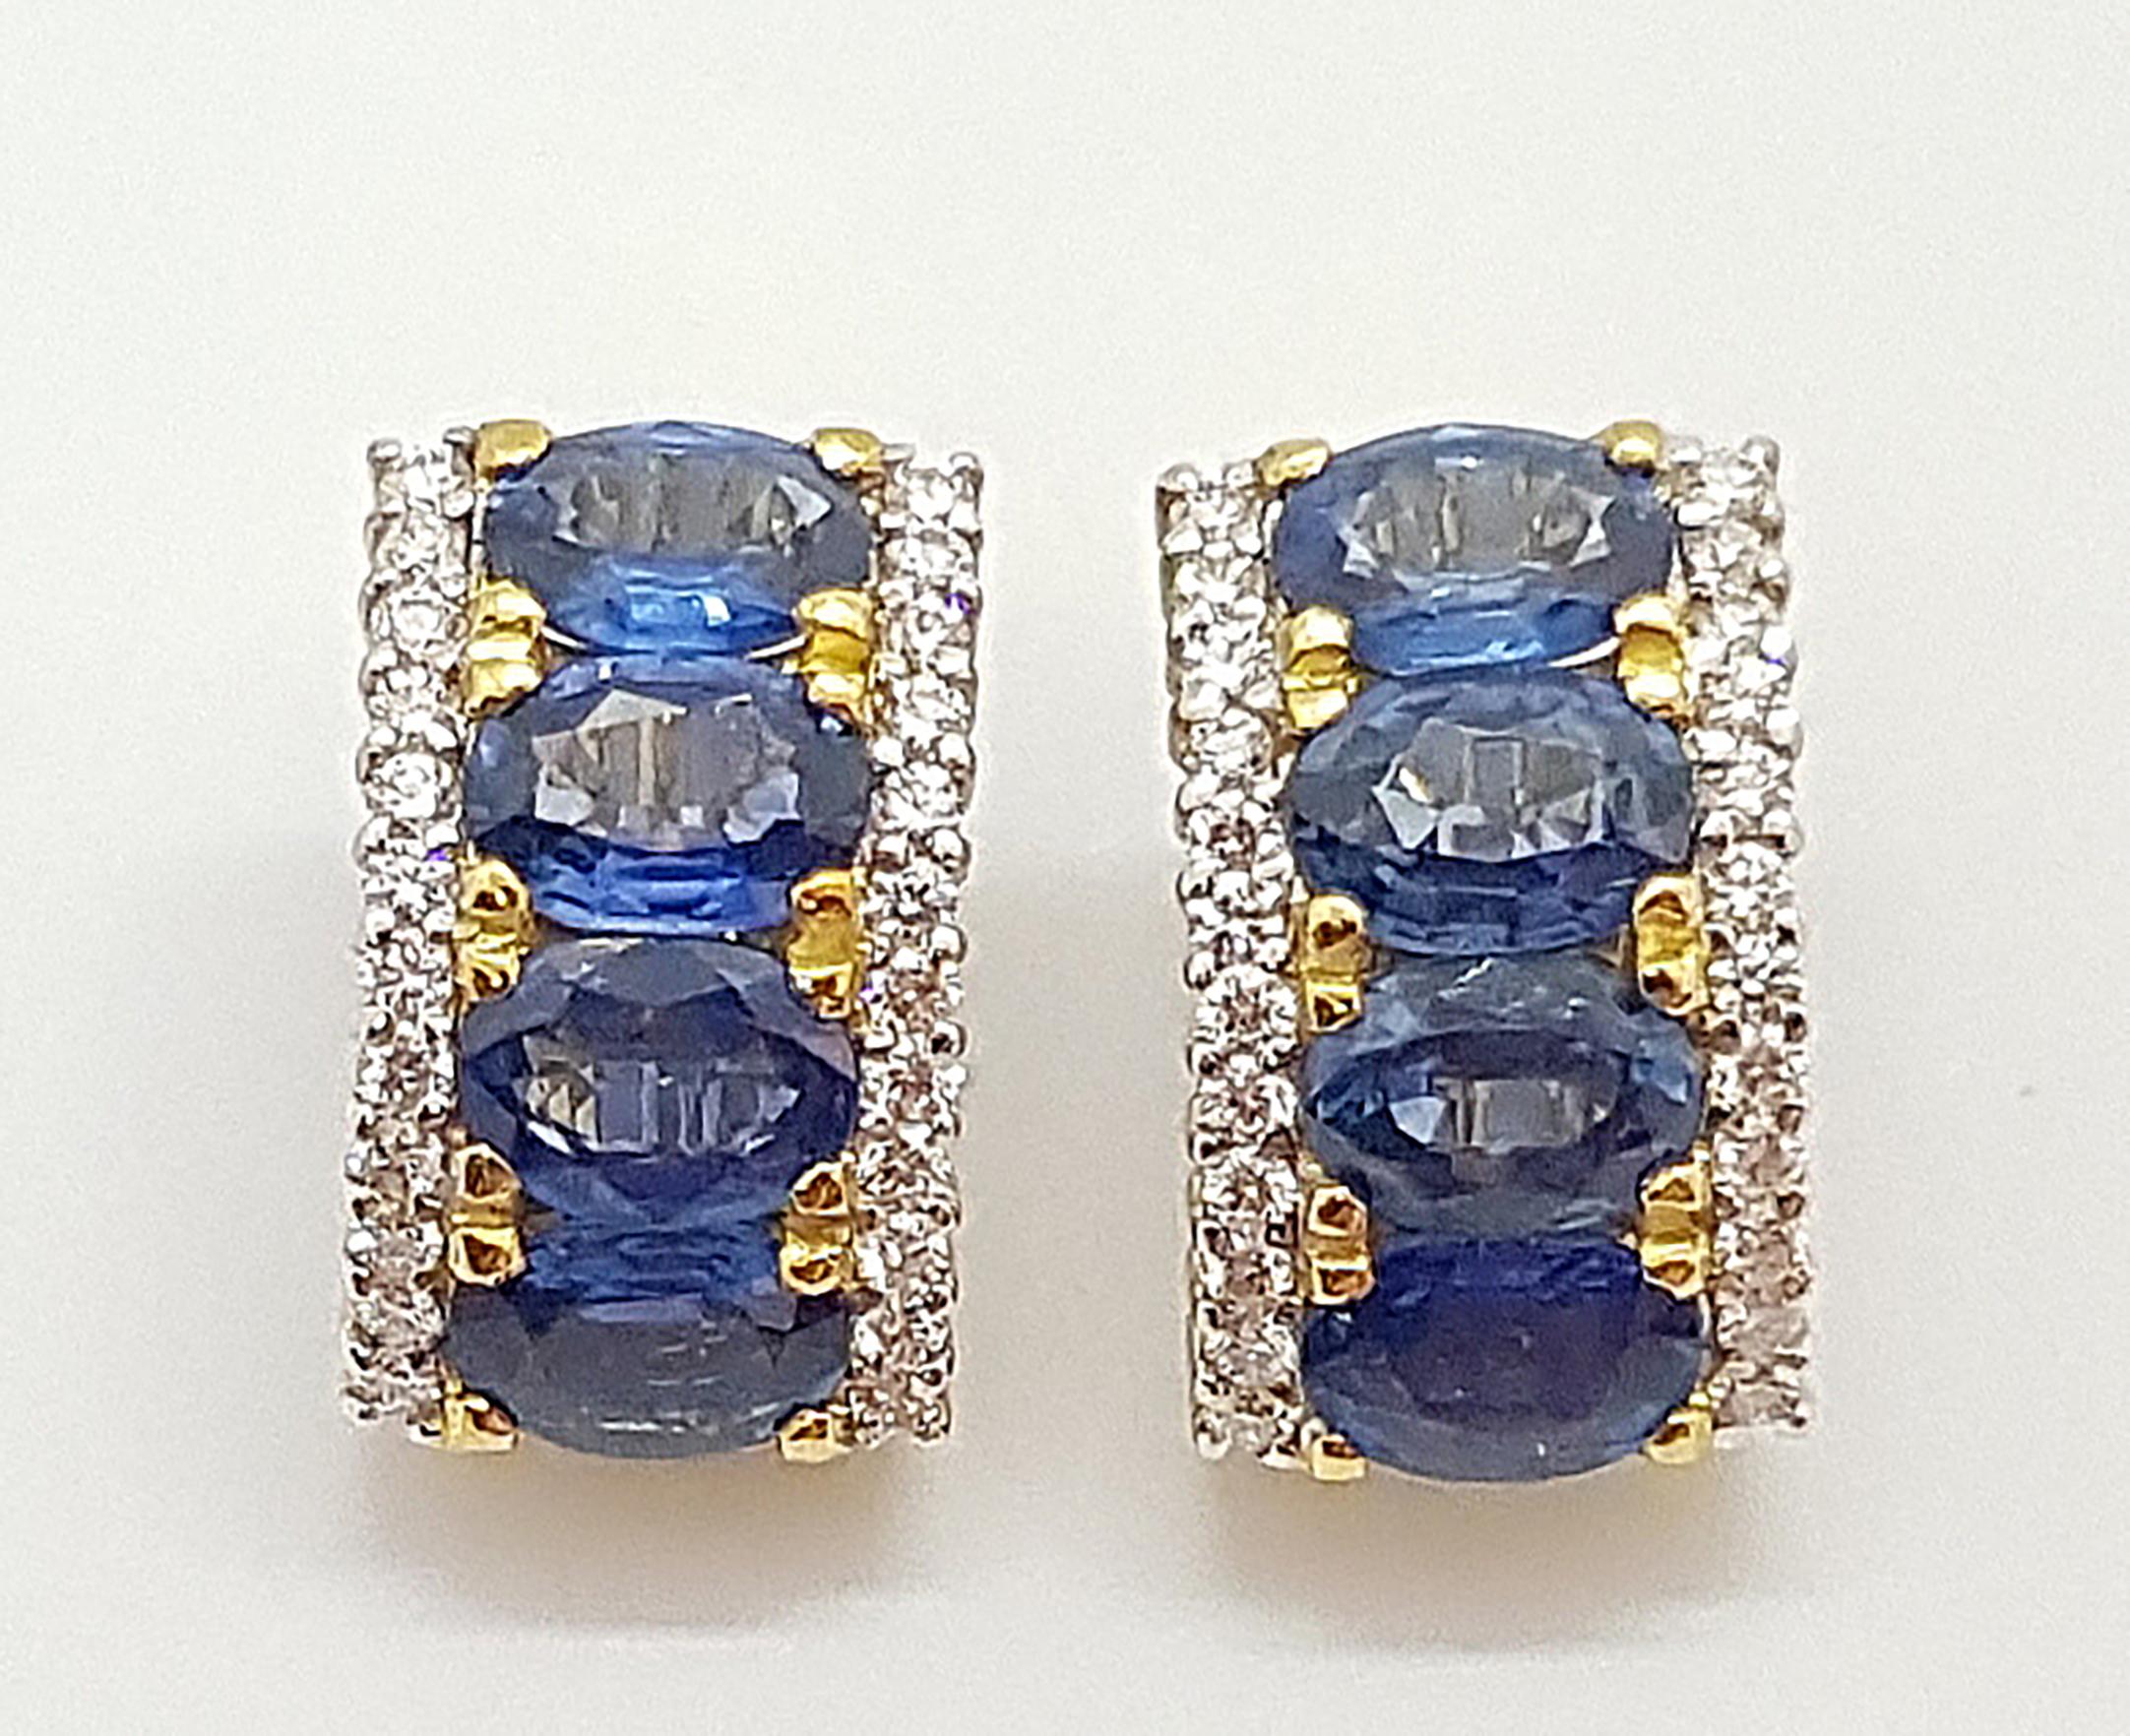 Blue Sapphire 7.26 carats with Diamond 0.78 carat Earrings set in 18 Karat Gold Settings

Width:  1.0 cm 
Length: 2.0 cm
Total Weight: 10.68 grams

